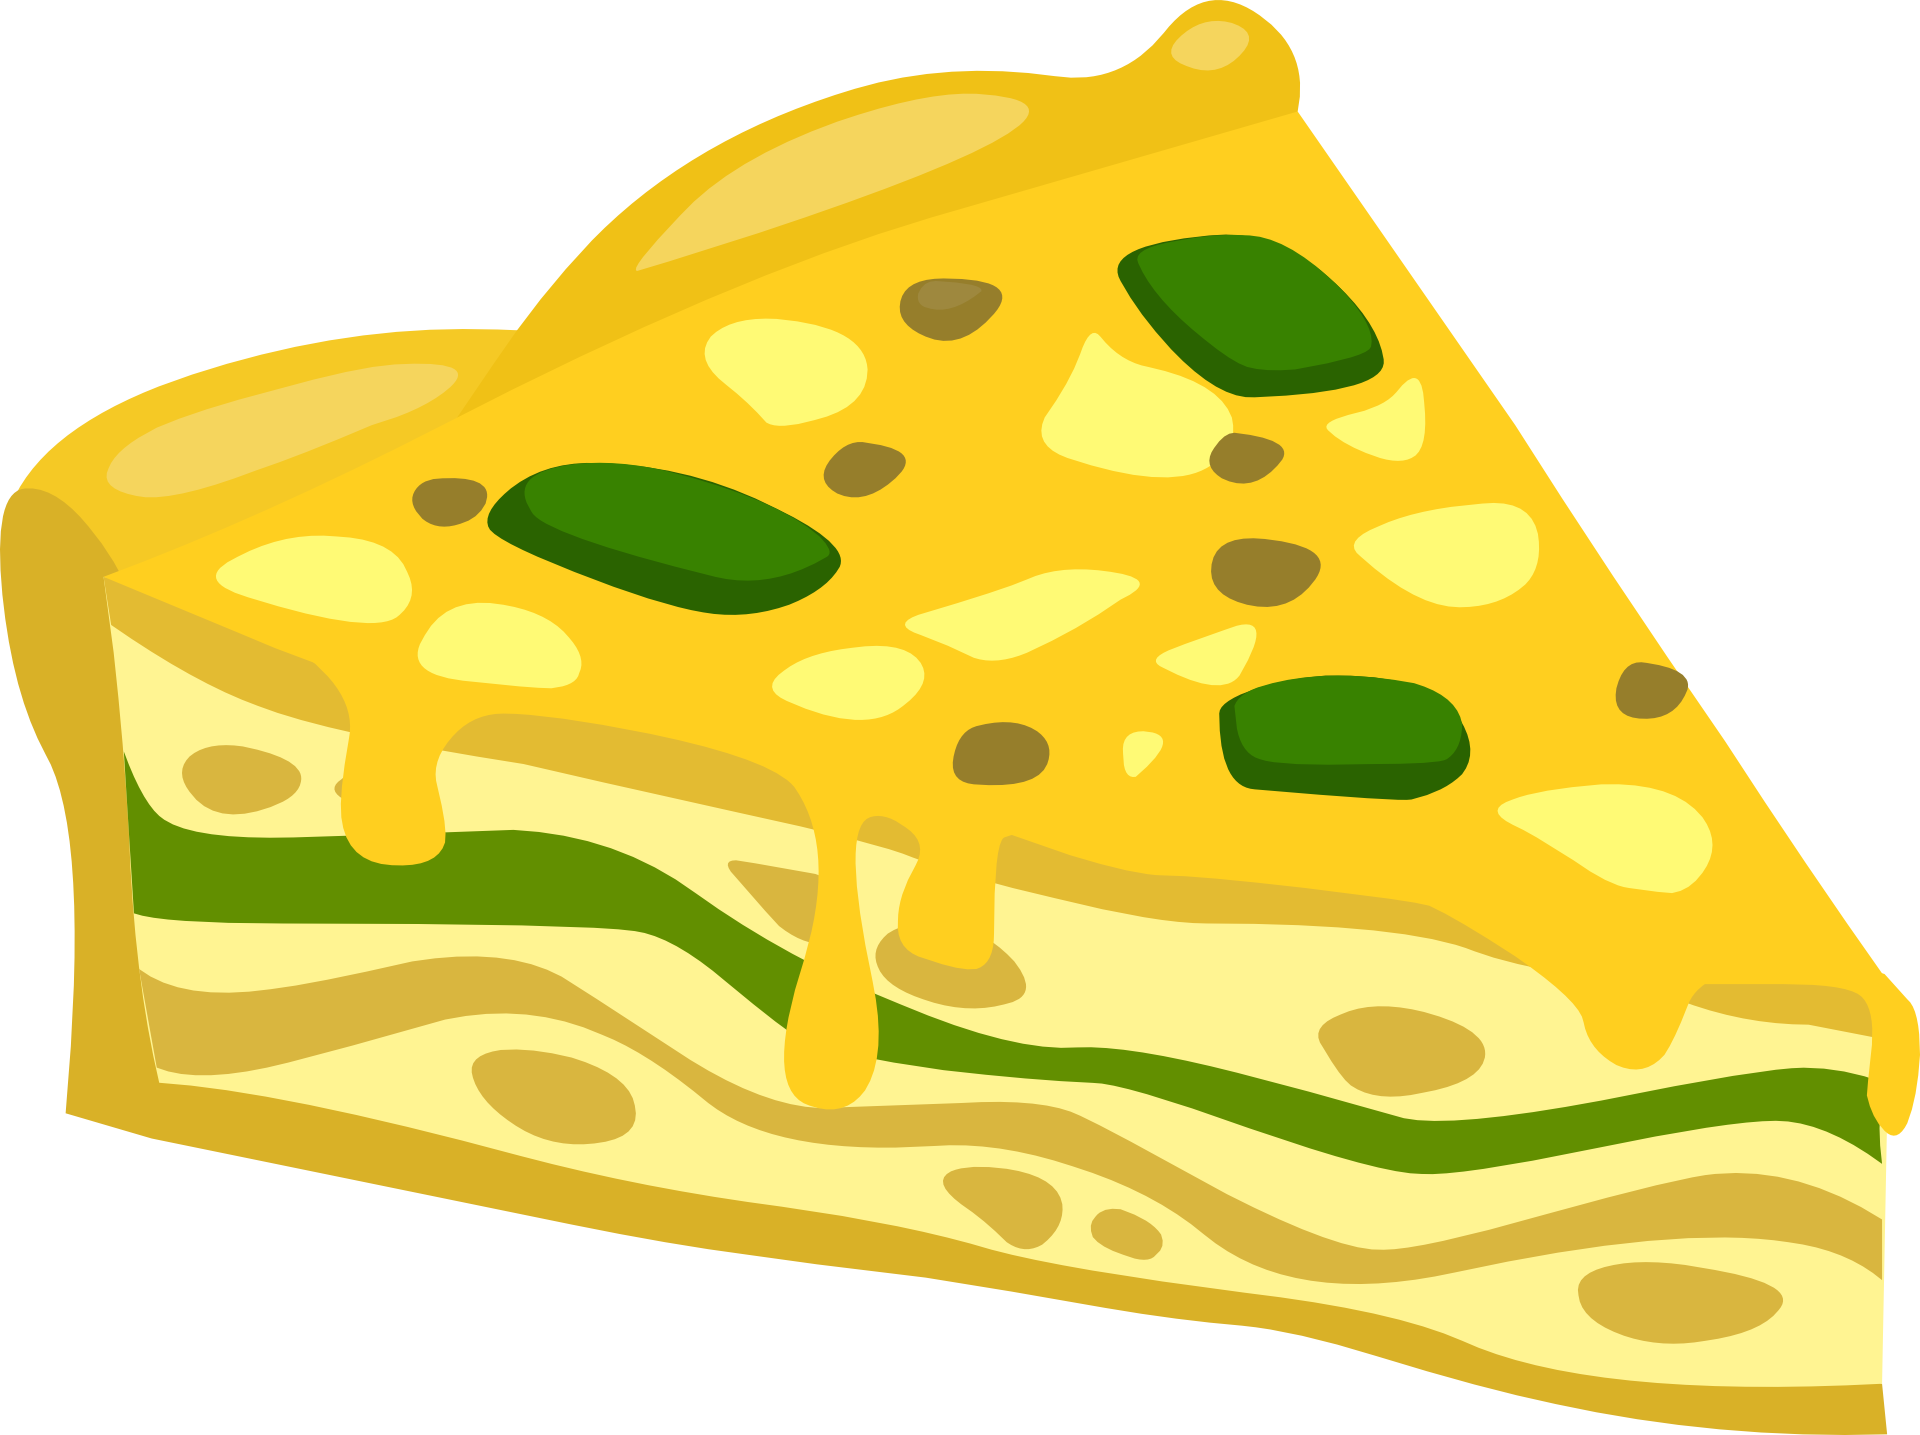 Mexican tortilla drawing free image download